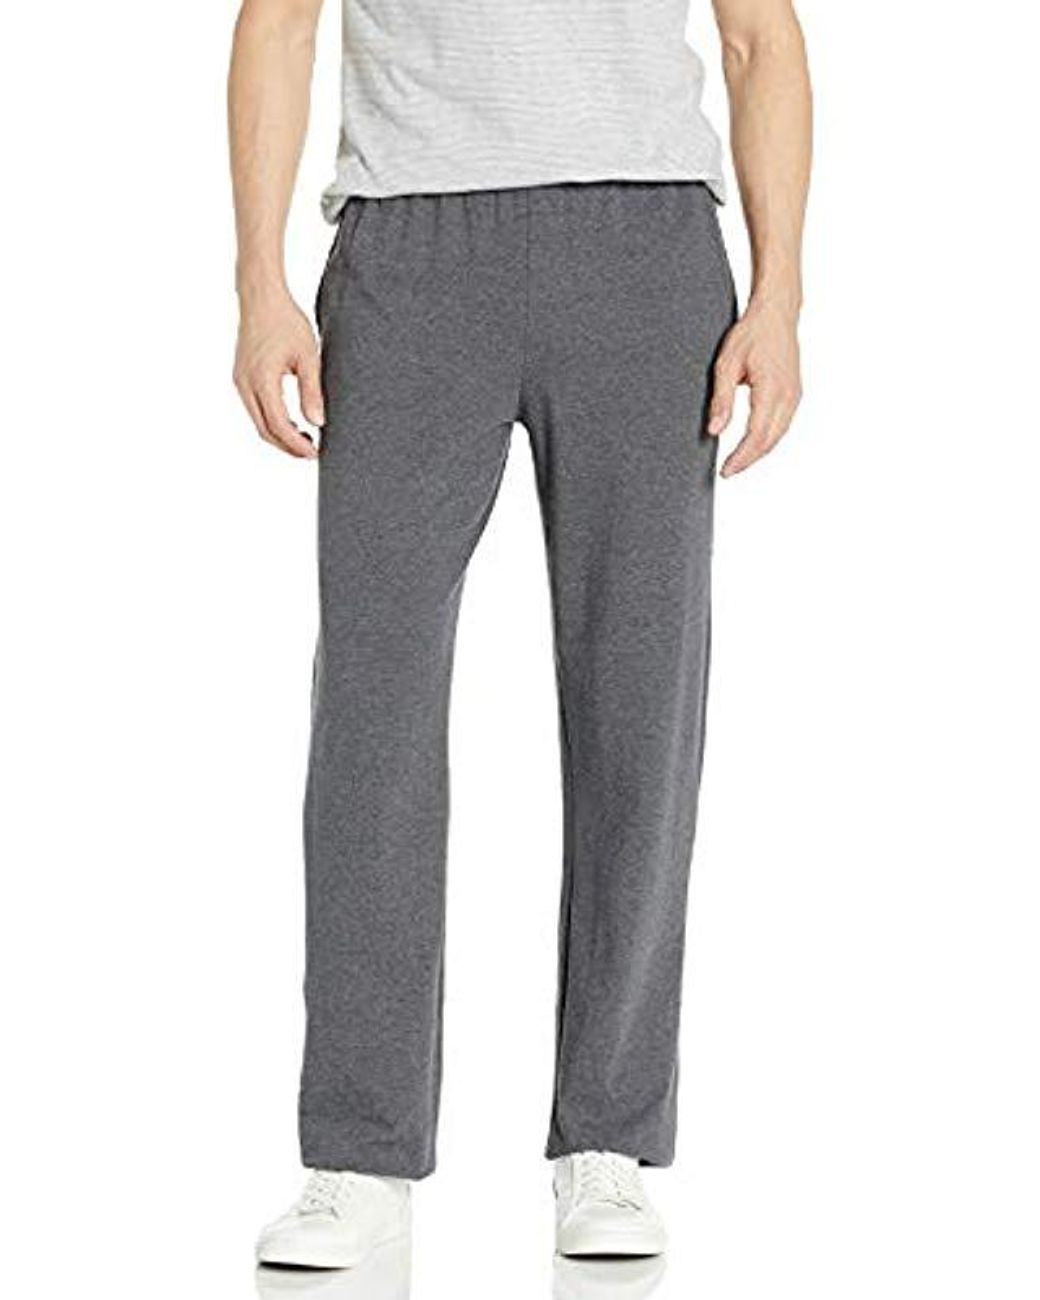 Hanes Jersey Pant in Charcoal Heather (Gray) for Men - Lyst